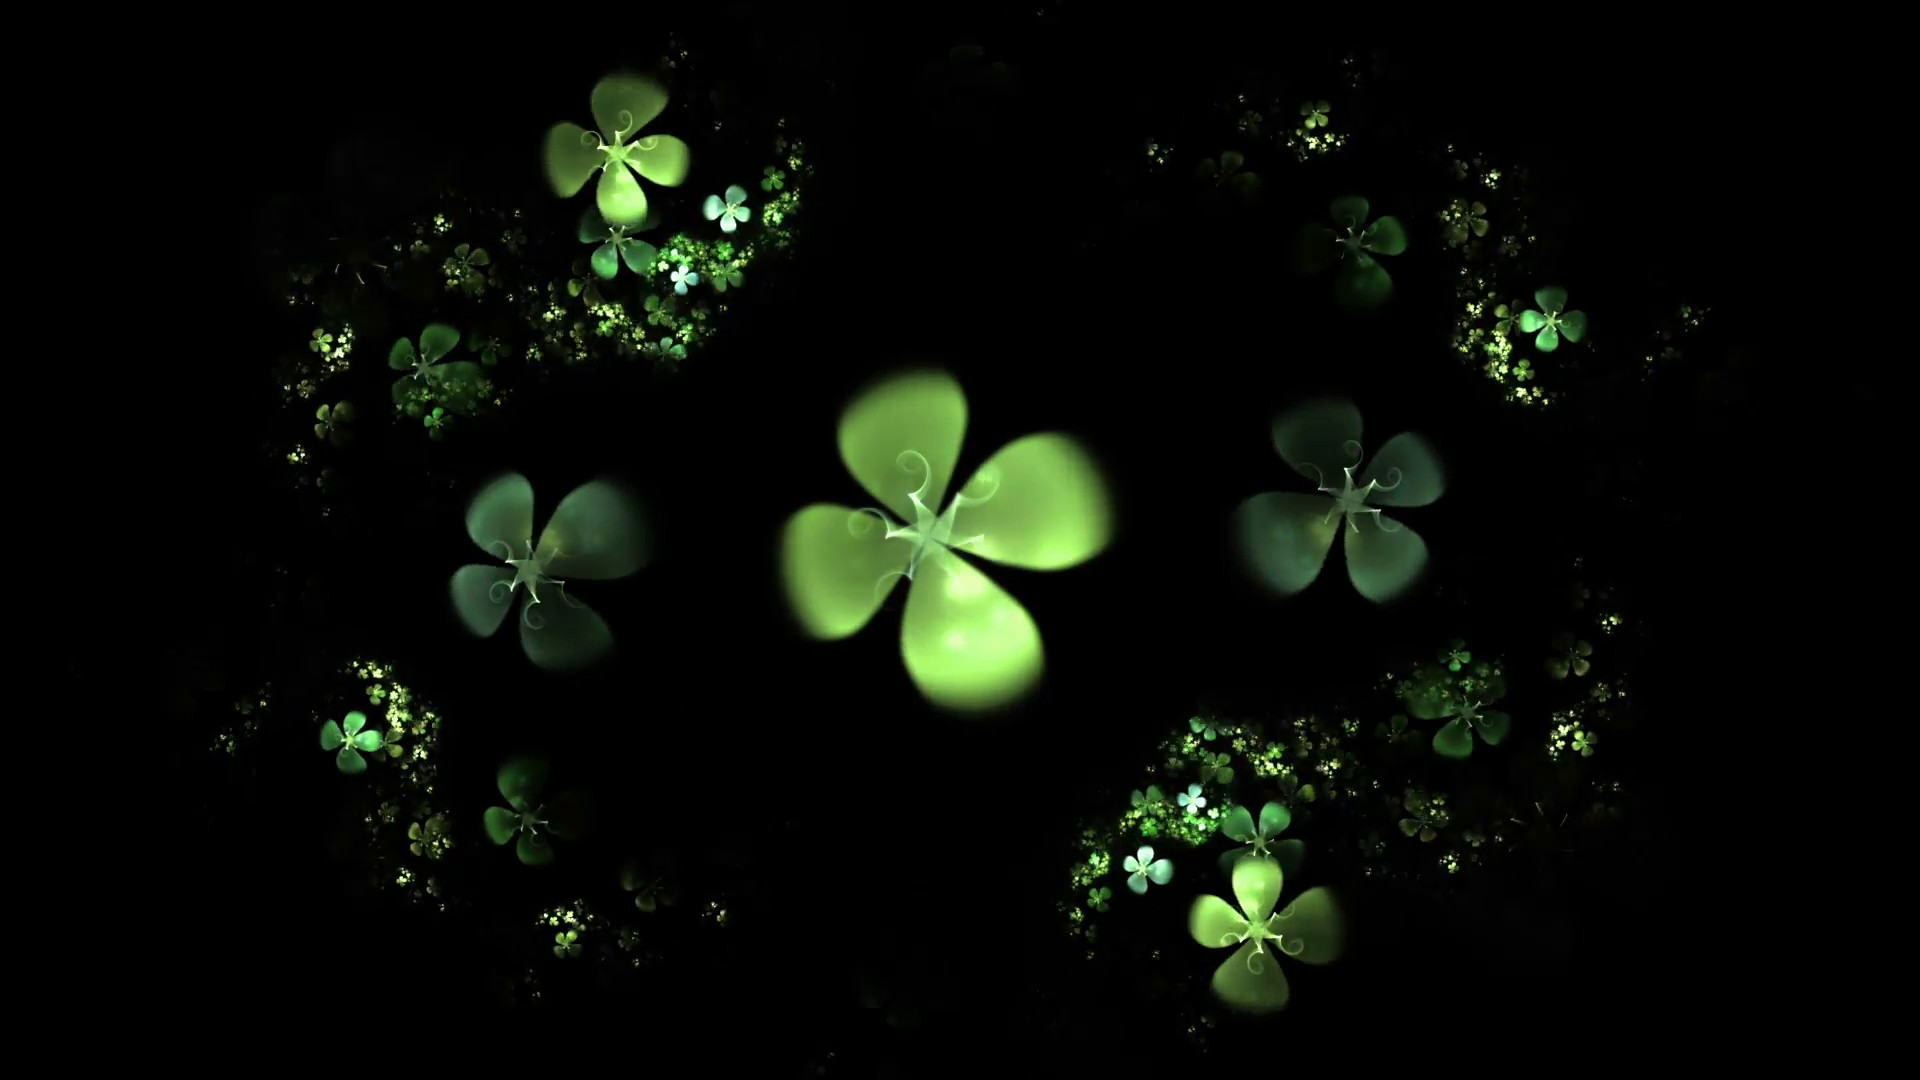 1920x1080 Green Four Leaf Clover On Black - Shamrock, animated illustration of a  four-leafed clovers field on black background, 30fps, HD1080, loopabable  Motion ...